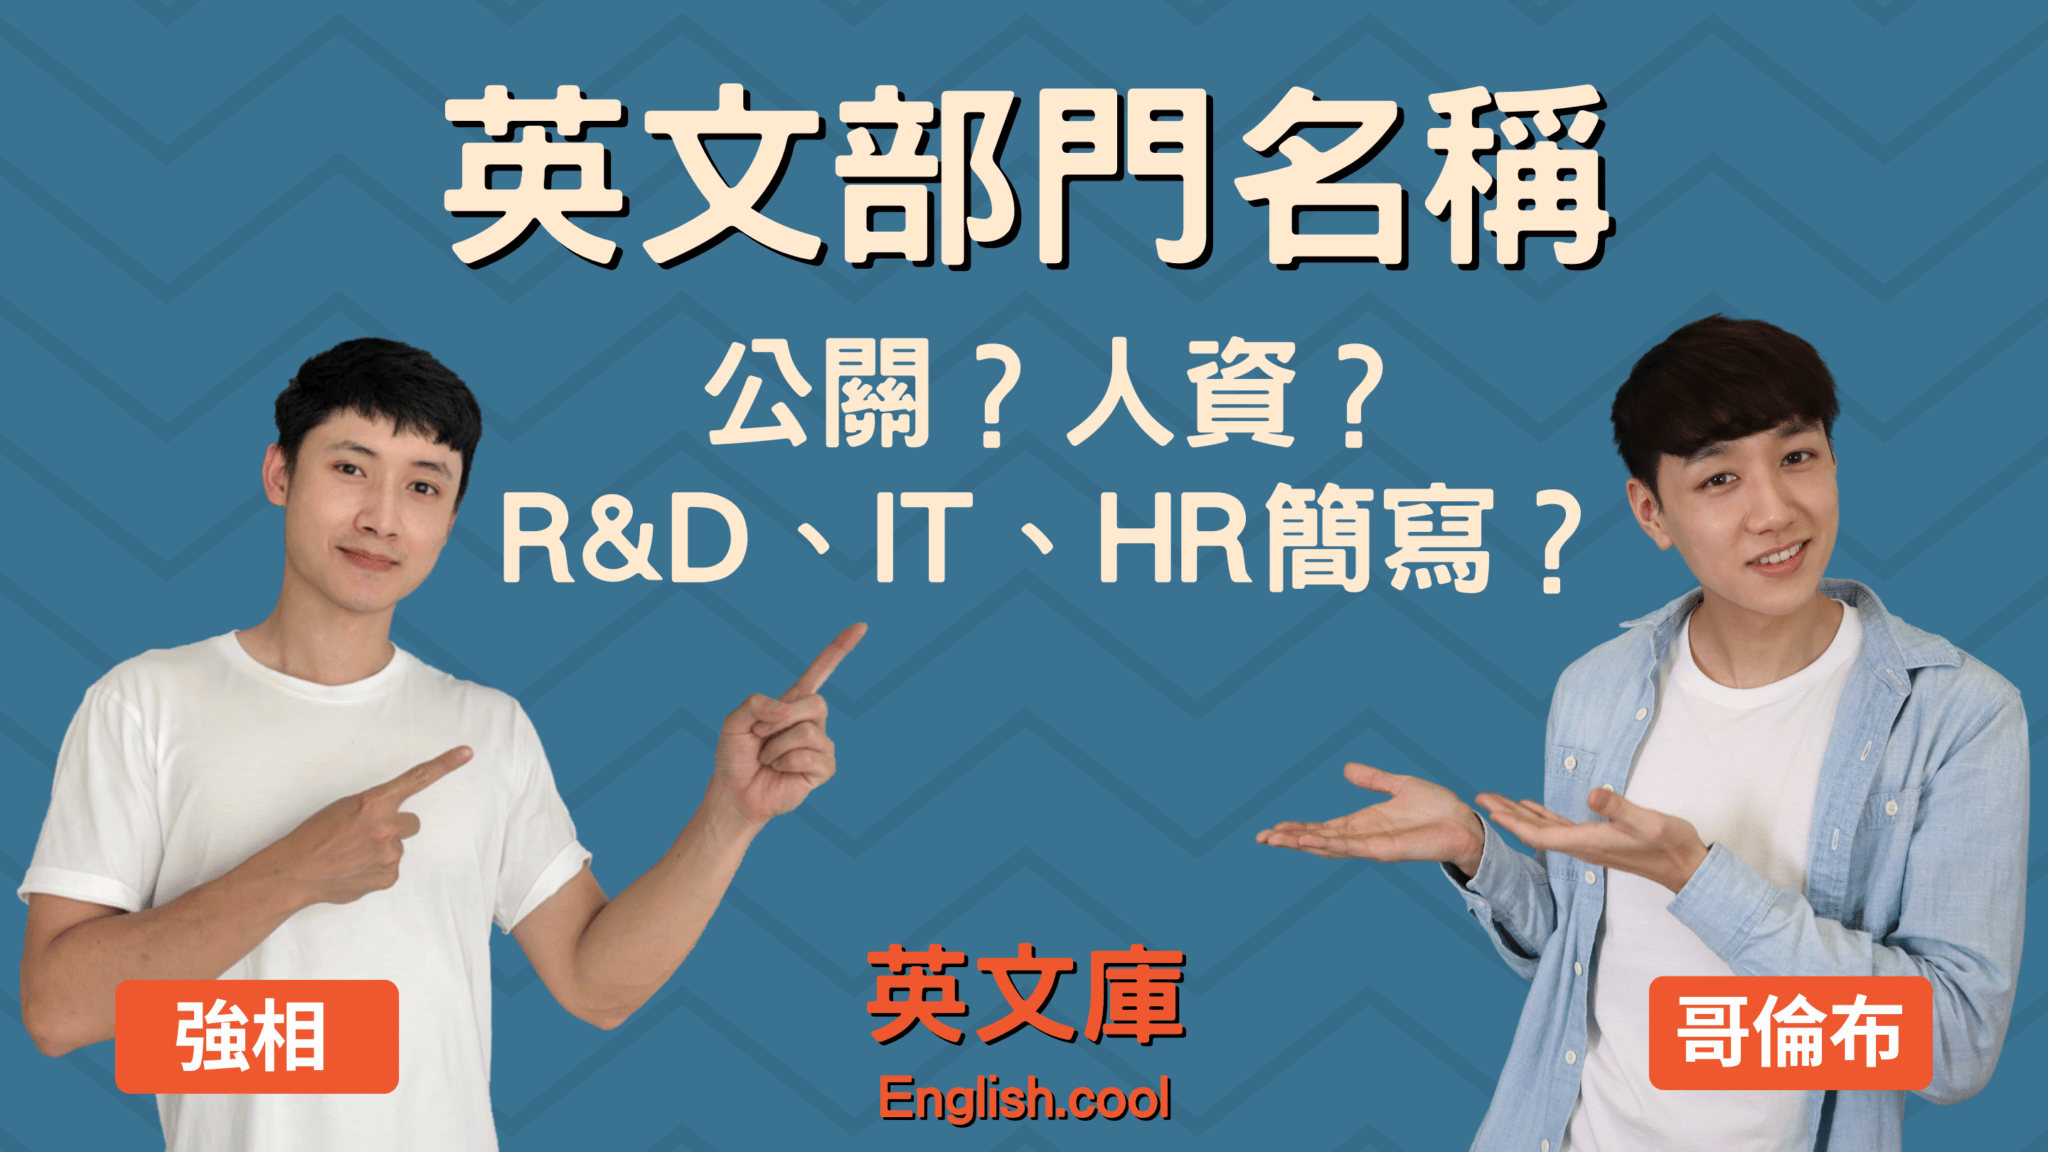 You are currently viewing 【英文部門名稱】公關？人資？來搞懂R&D、IT、HR 簡寫！